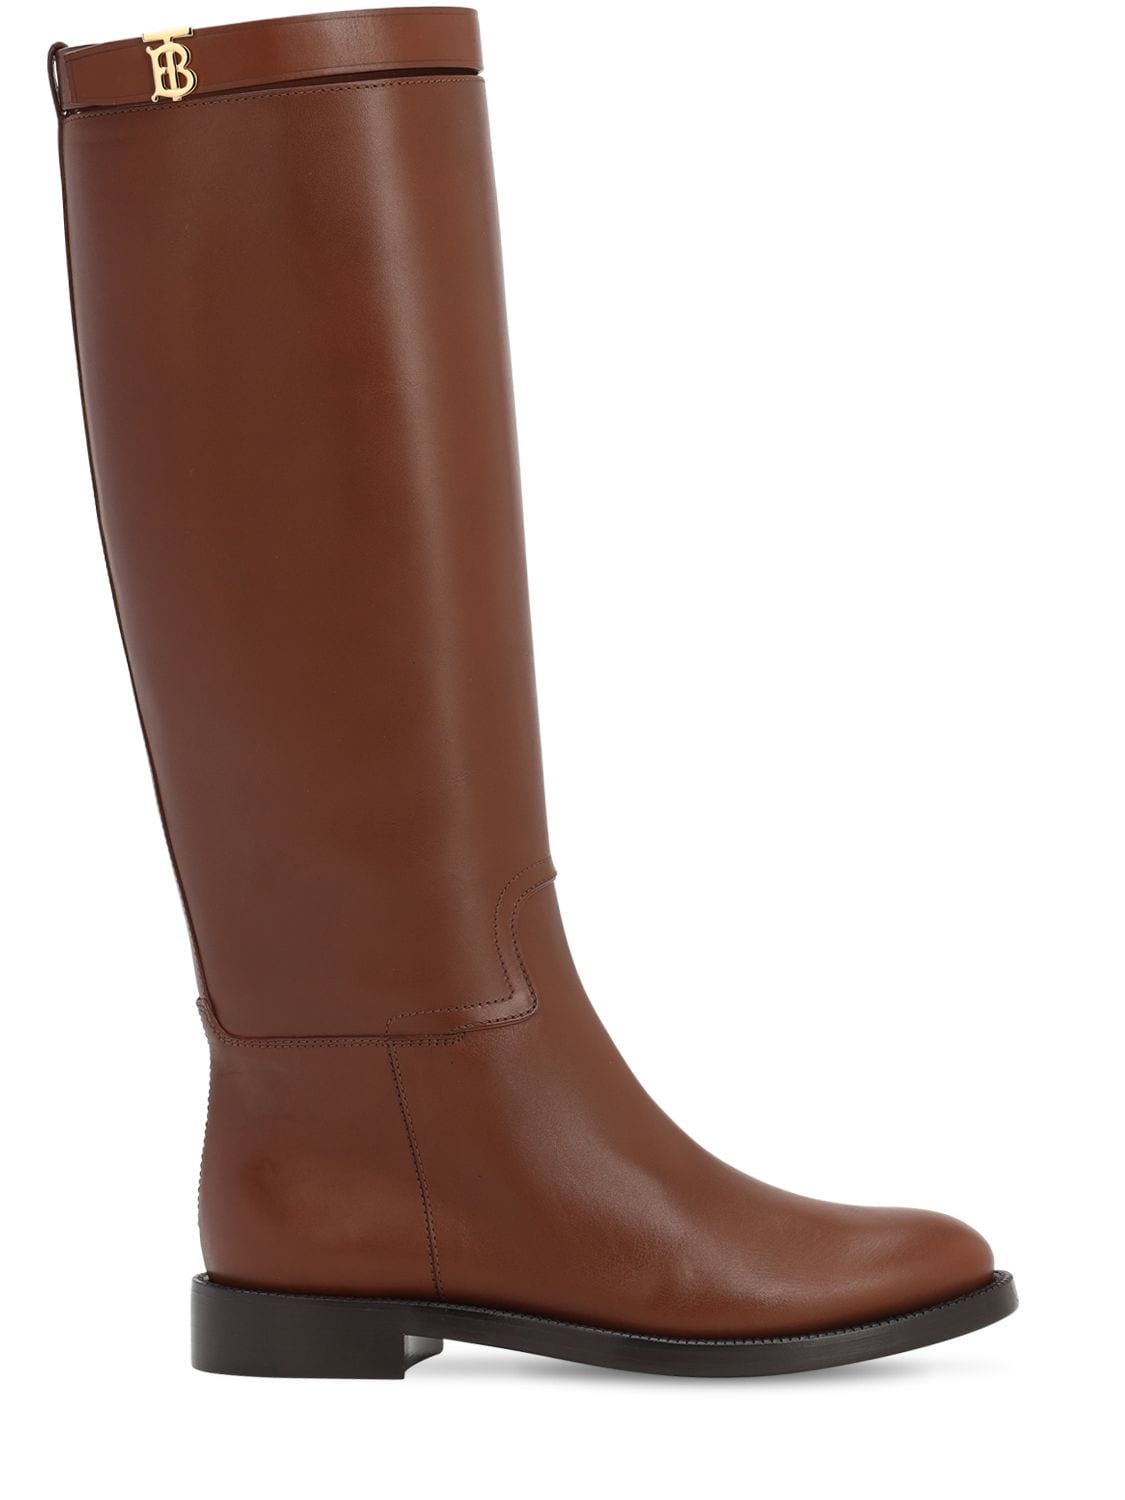 BURBERRY 30MM REDGRAVE LEATHER TALL BOOTS,71IG4S002-QTEZNJM1